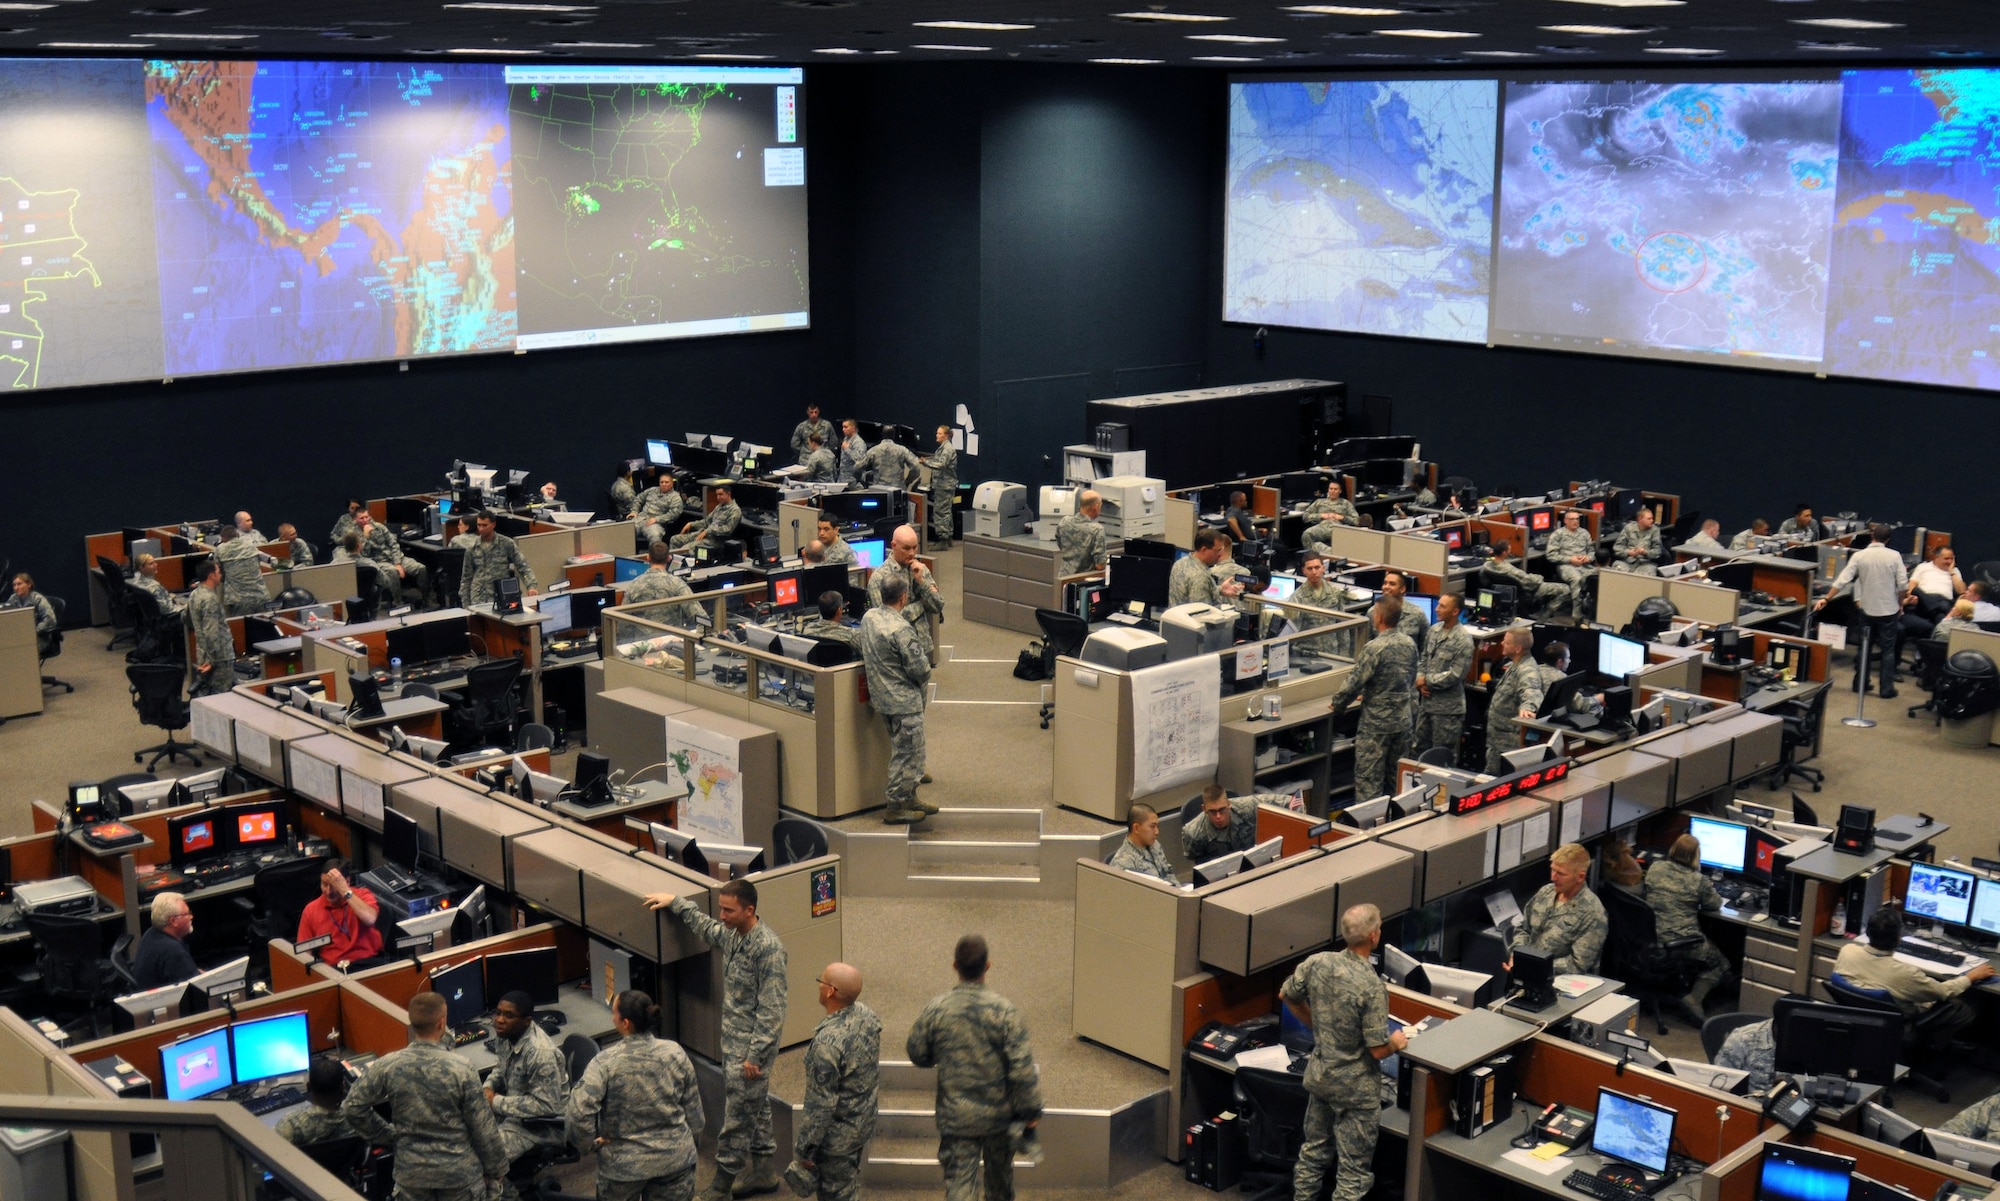 The 612th Air and Space Operations Center provides command and control of air and space power in USSOUTHCOM's area of responsibility, to include 31 countries covering a sixth of the world's land mass. The $55 million facility, which spans 26,750 square ft., operates 24-hours-a-day to support joint and coalition efforts in the Caribbean, Central America and South America. (U.S. Air Force photo by Capt. Justin Brockhoff / Released)